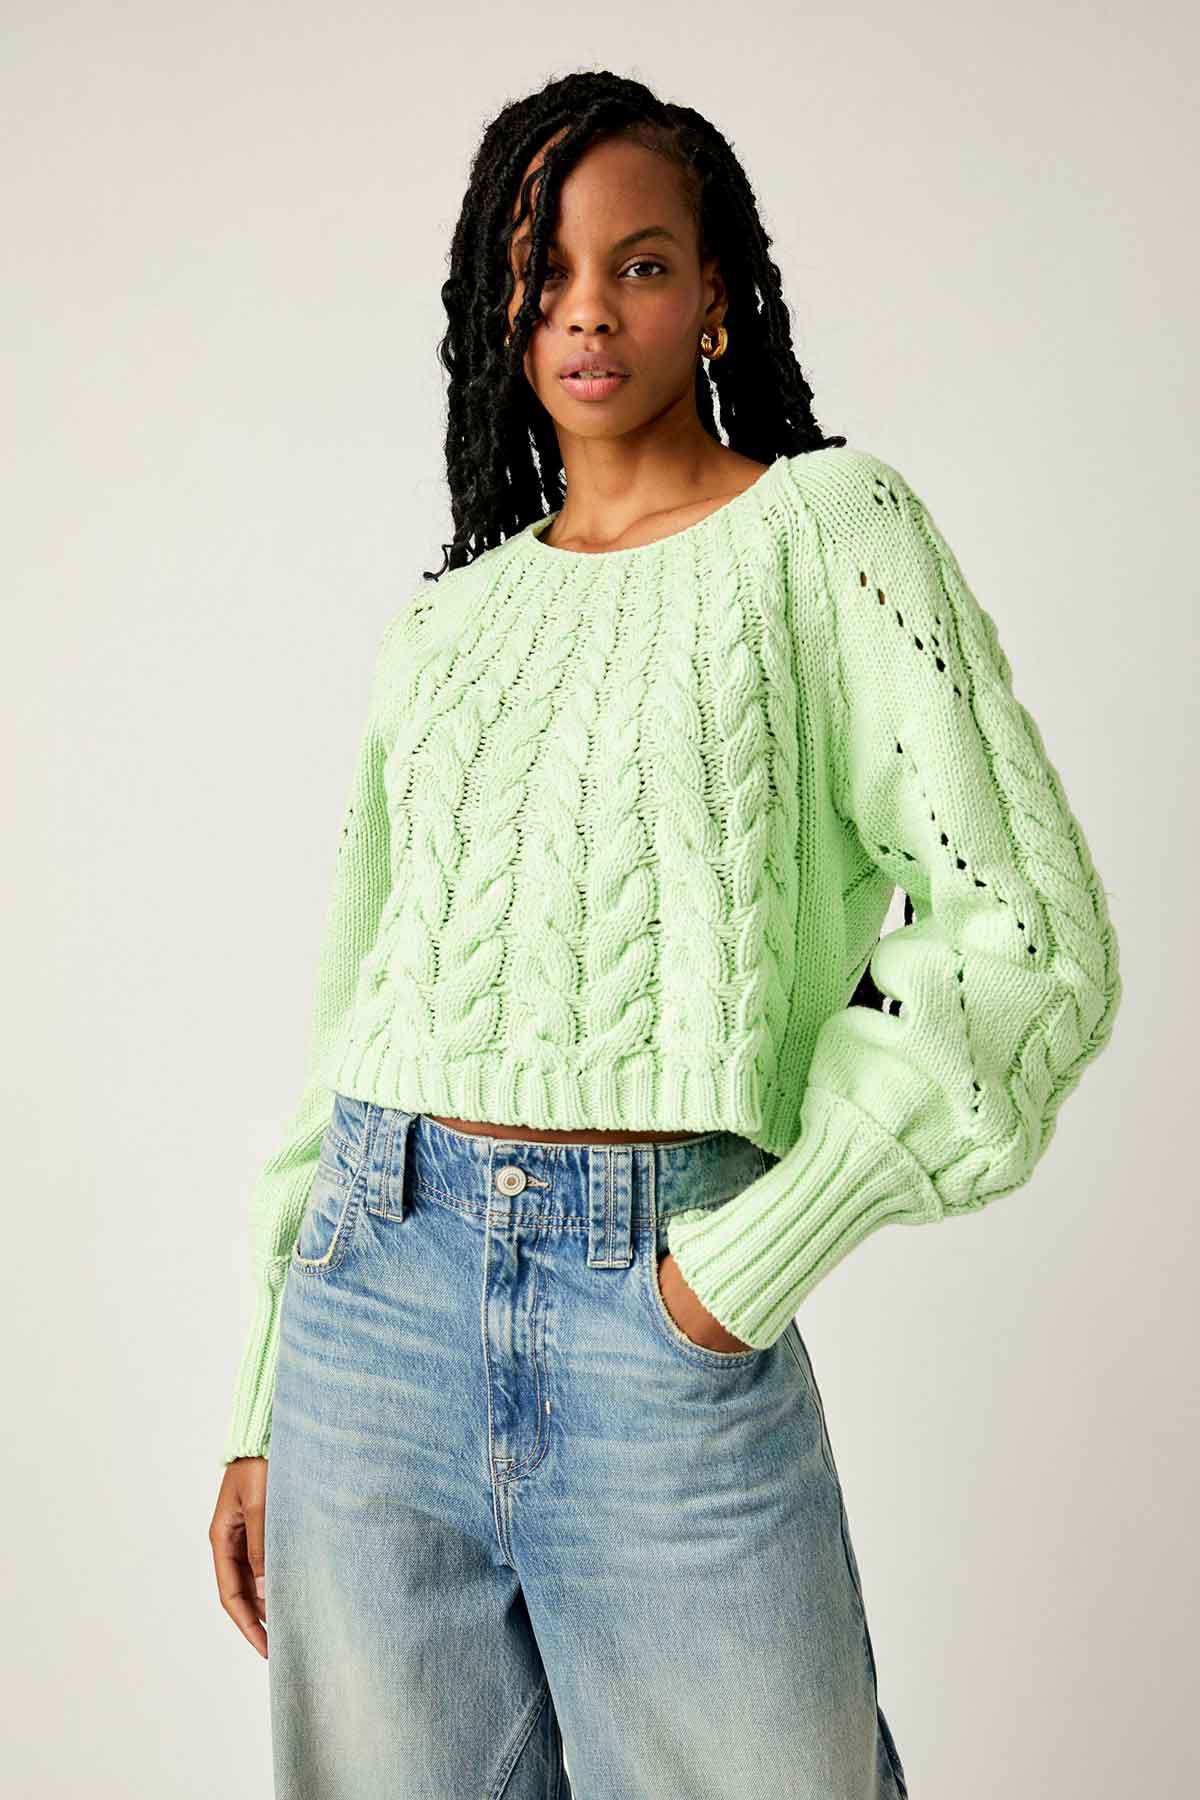 Free People - Sandre Pullover - Green Light - Front